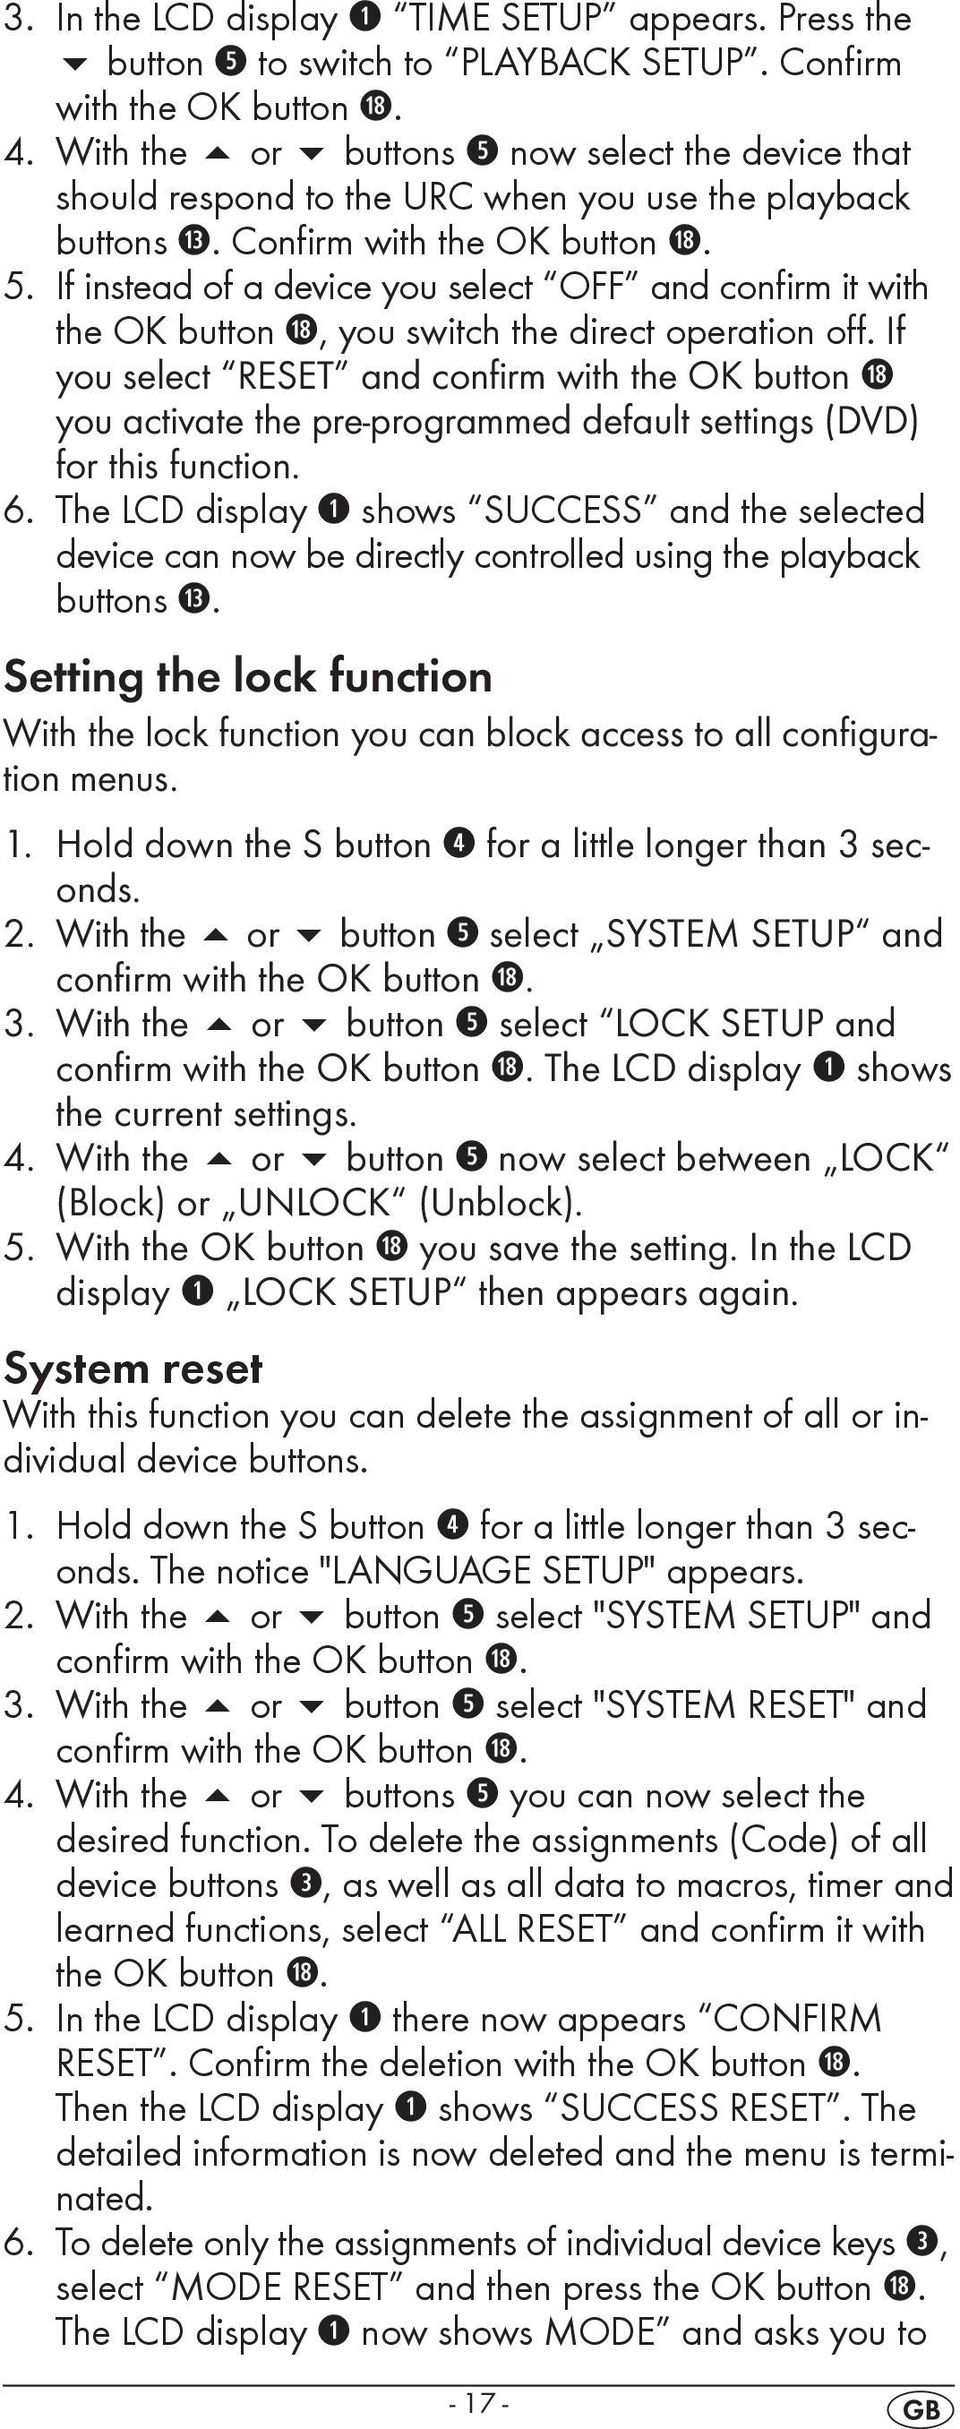 2. With the or button select SYSTEM SETUP and confirm with the OK button. 3.With the or button select LOCK SETUP and confirm with the OK button.